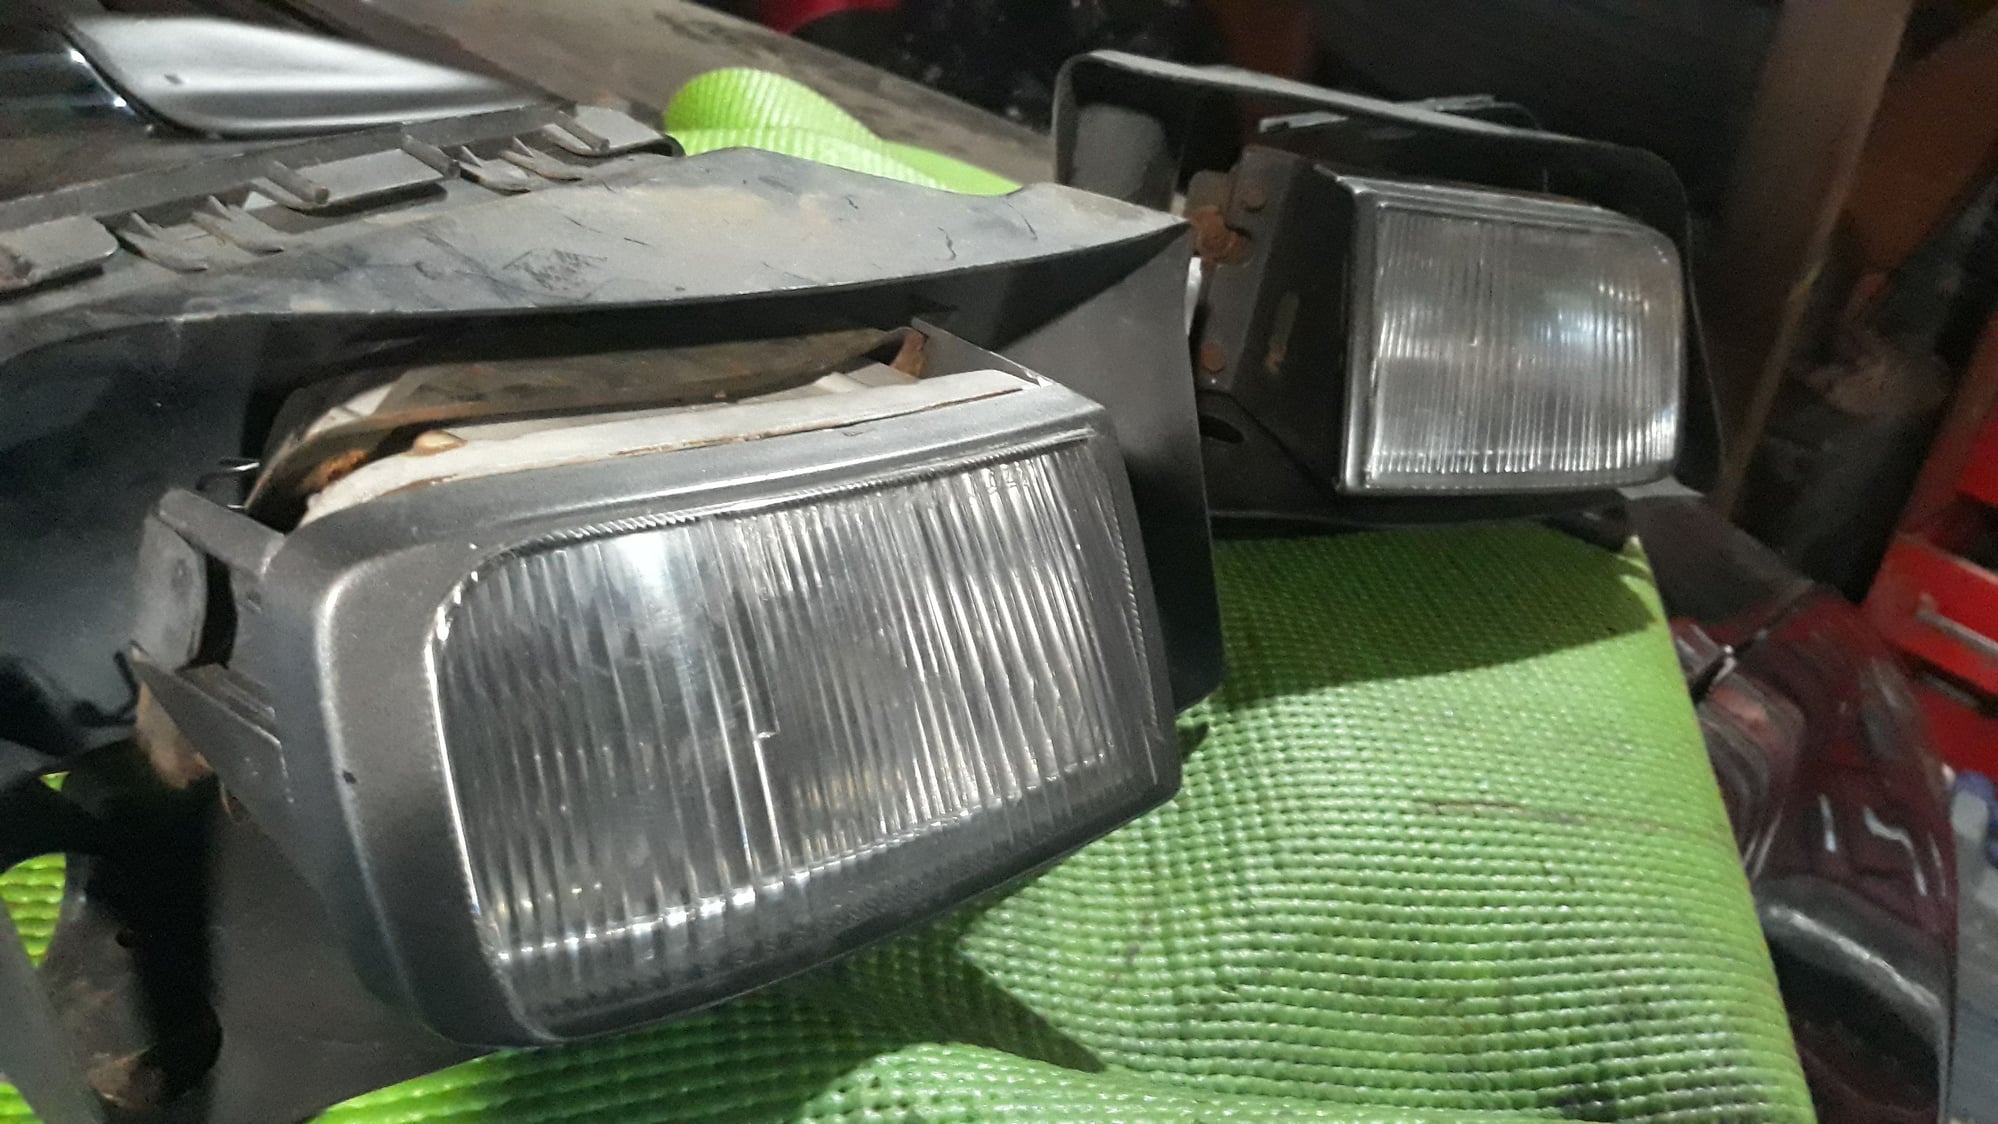 Lights - fc3s fog lights - Used - 1986 to 1991 Mazda RX-7 - Clifton, NJ 07014, United States